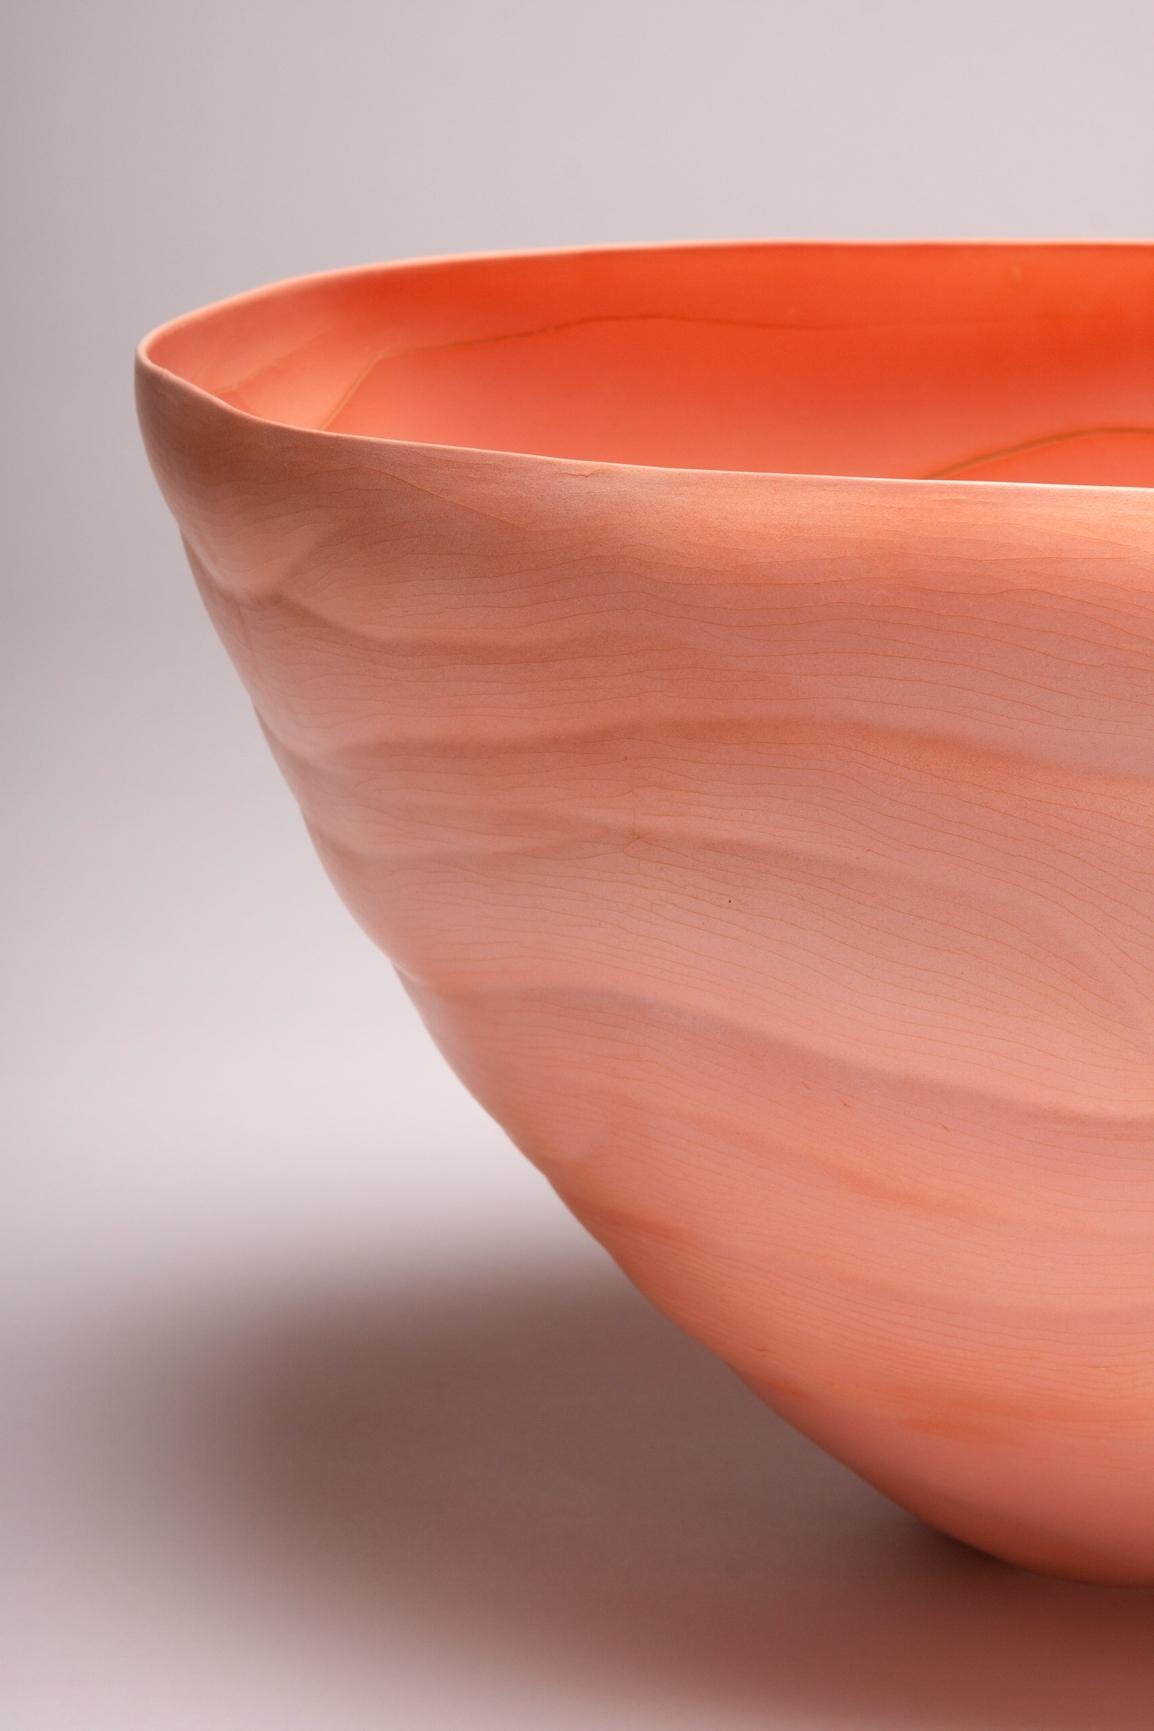 Inspired by forms and patterns found in nature, Paula Murray’s work often reflects the deeply spiritual connection between humans, culture, and the natural world. The intense saffron colour (an ancient pigment and spice) of this vessel accentuates